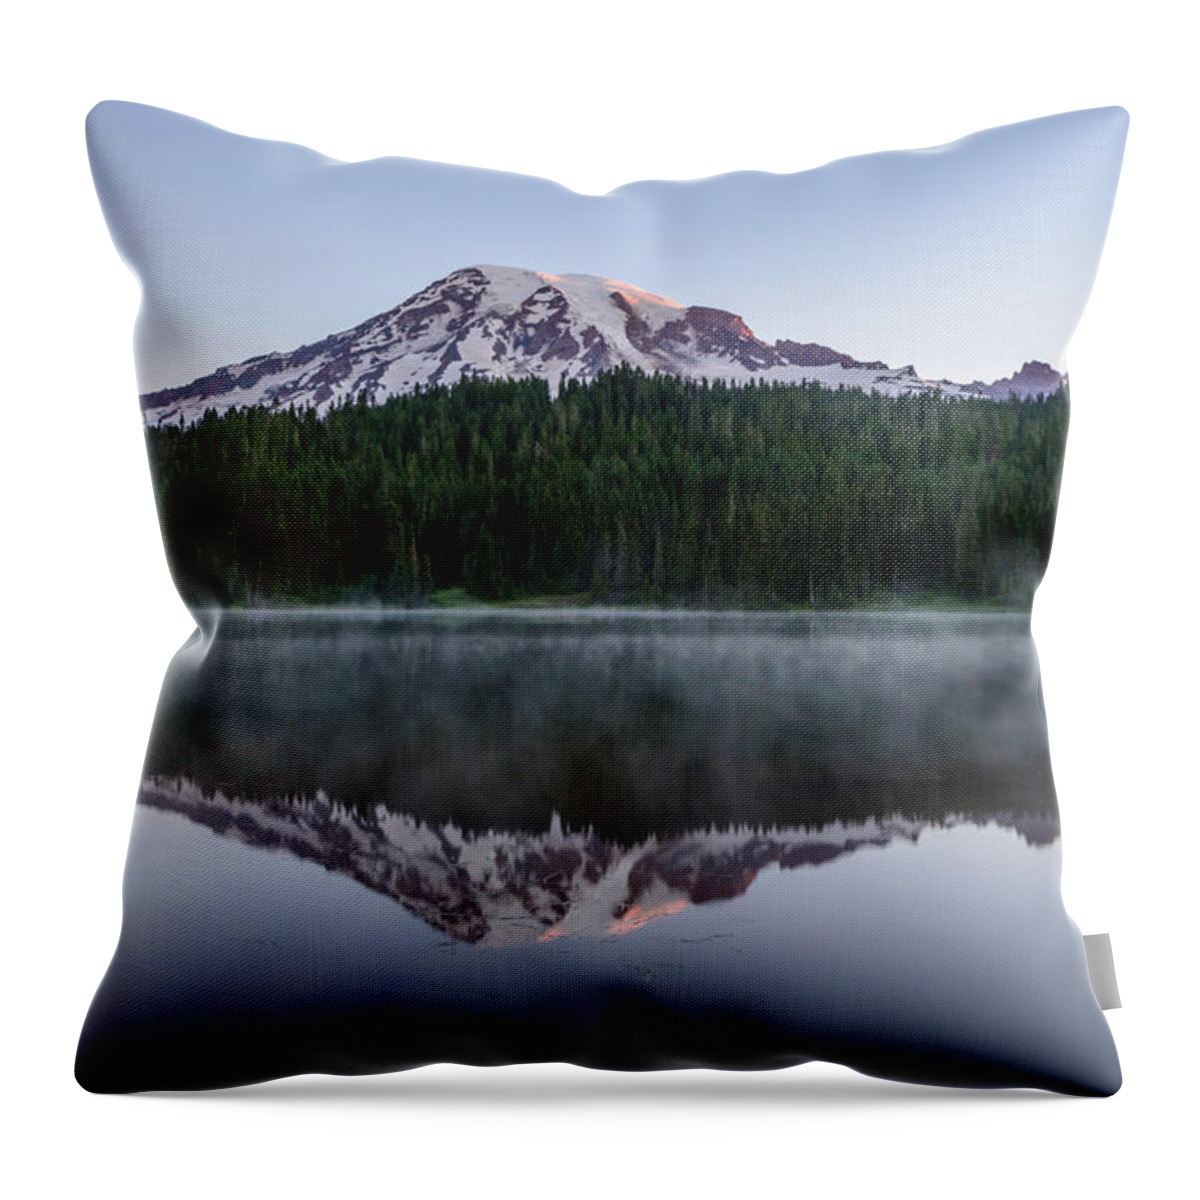 Sunrise Throw Pillow featuring the digital art The Reflection Lake by Michael Lee